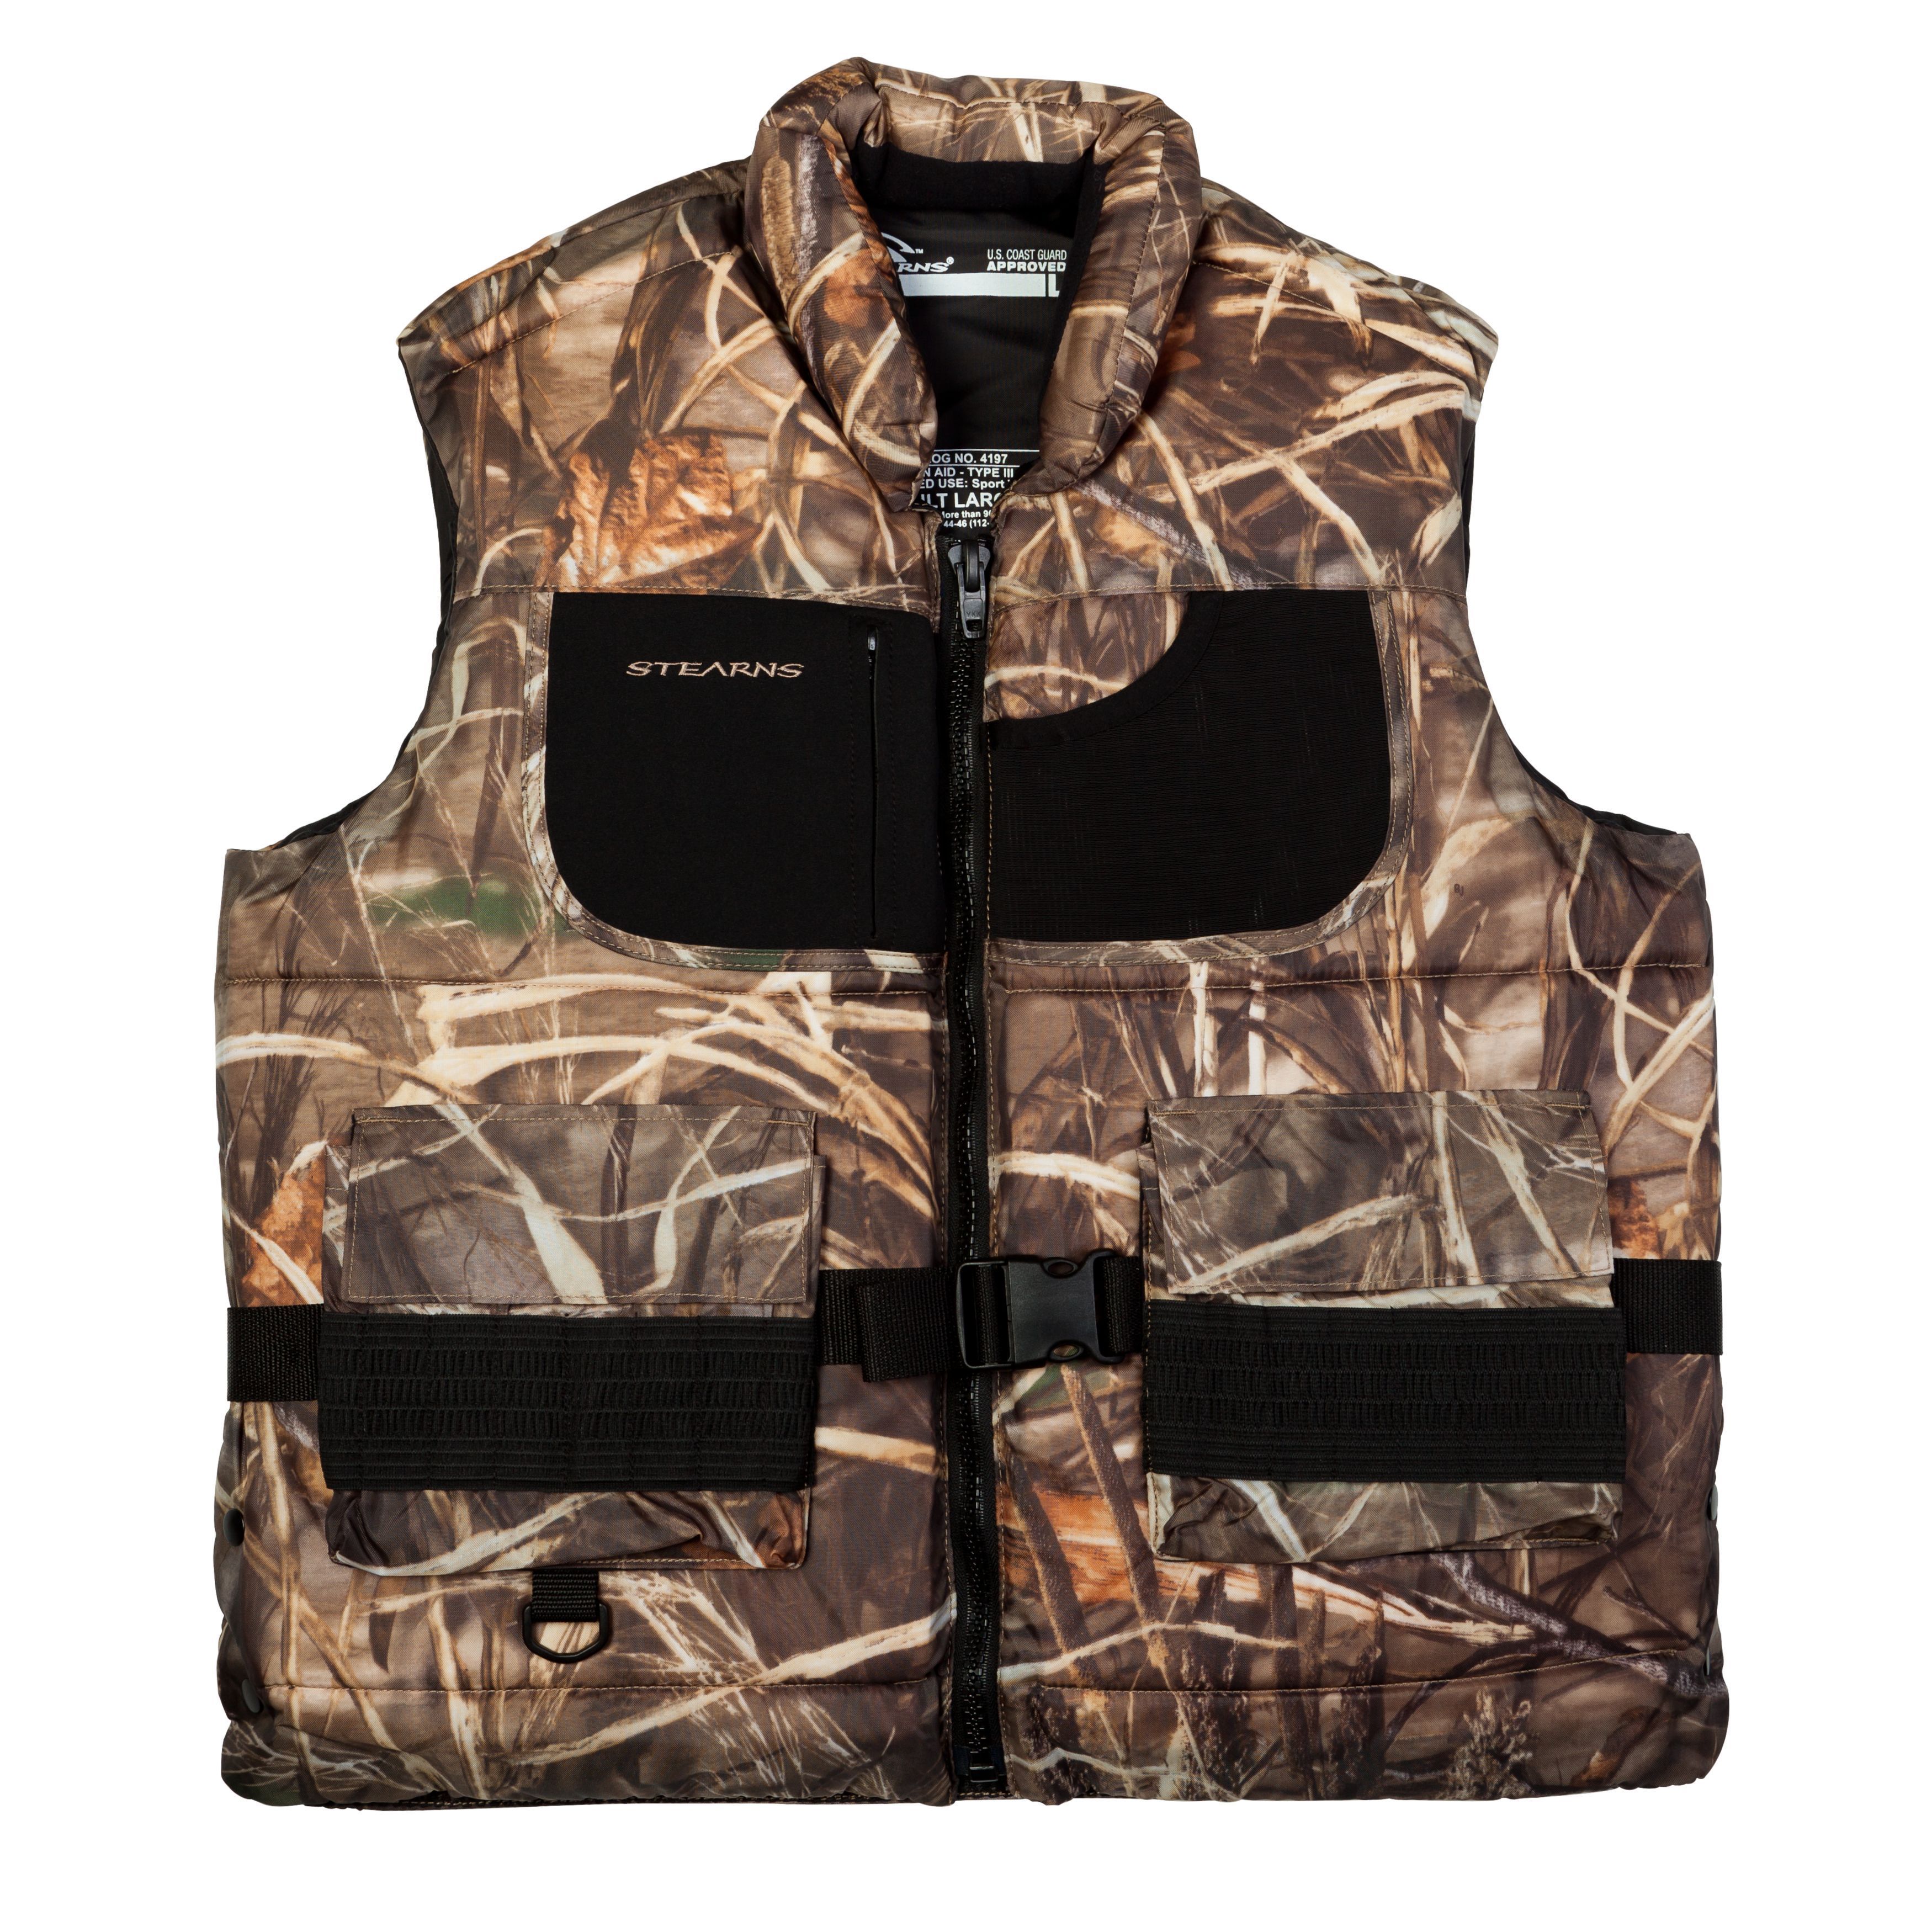 Stearns Waterfowl Realtree Max 4 Camofloat Vest